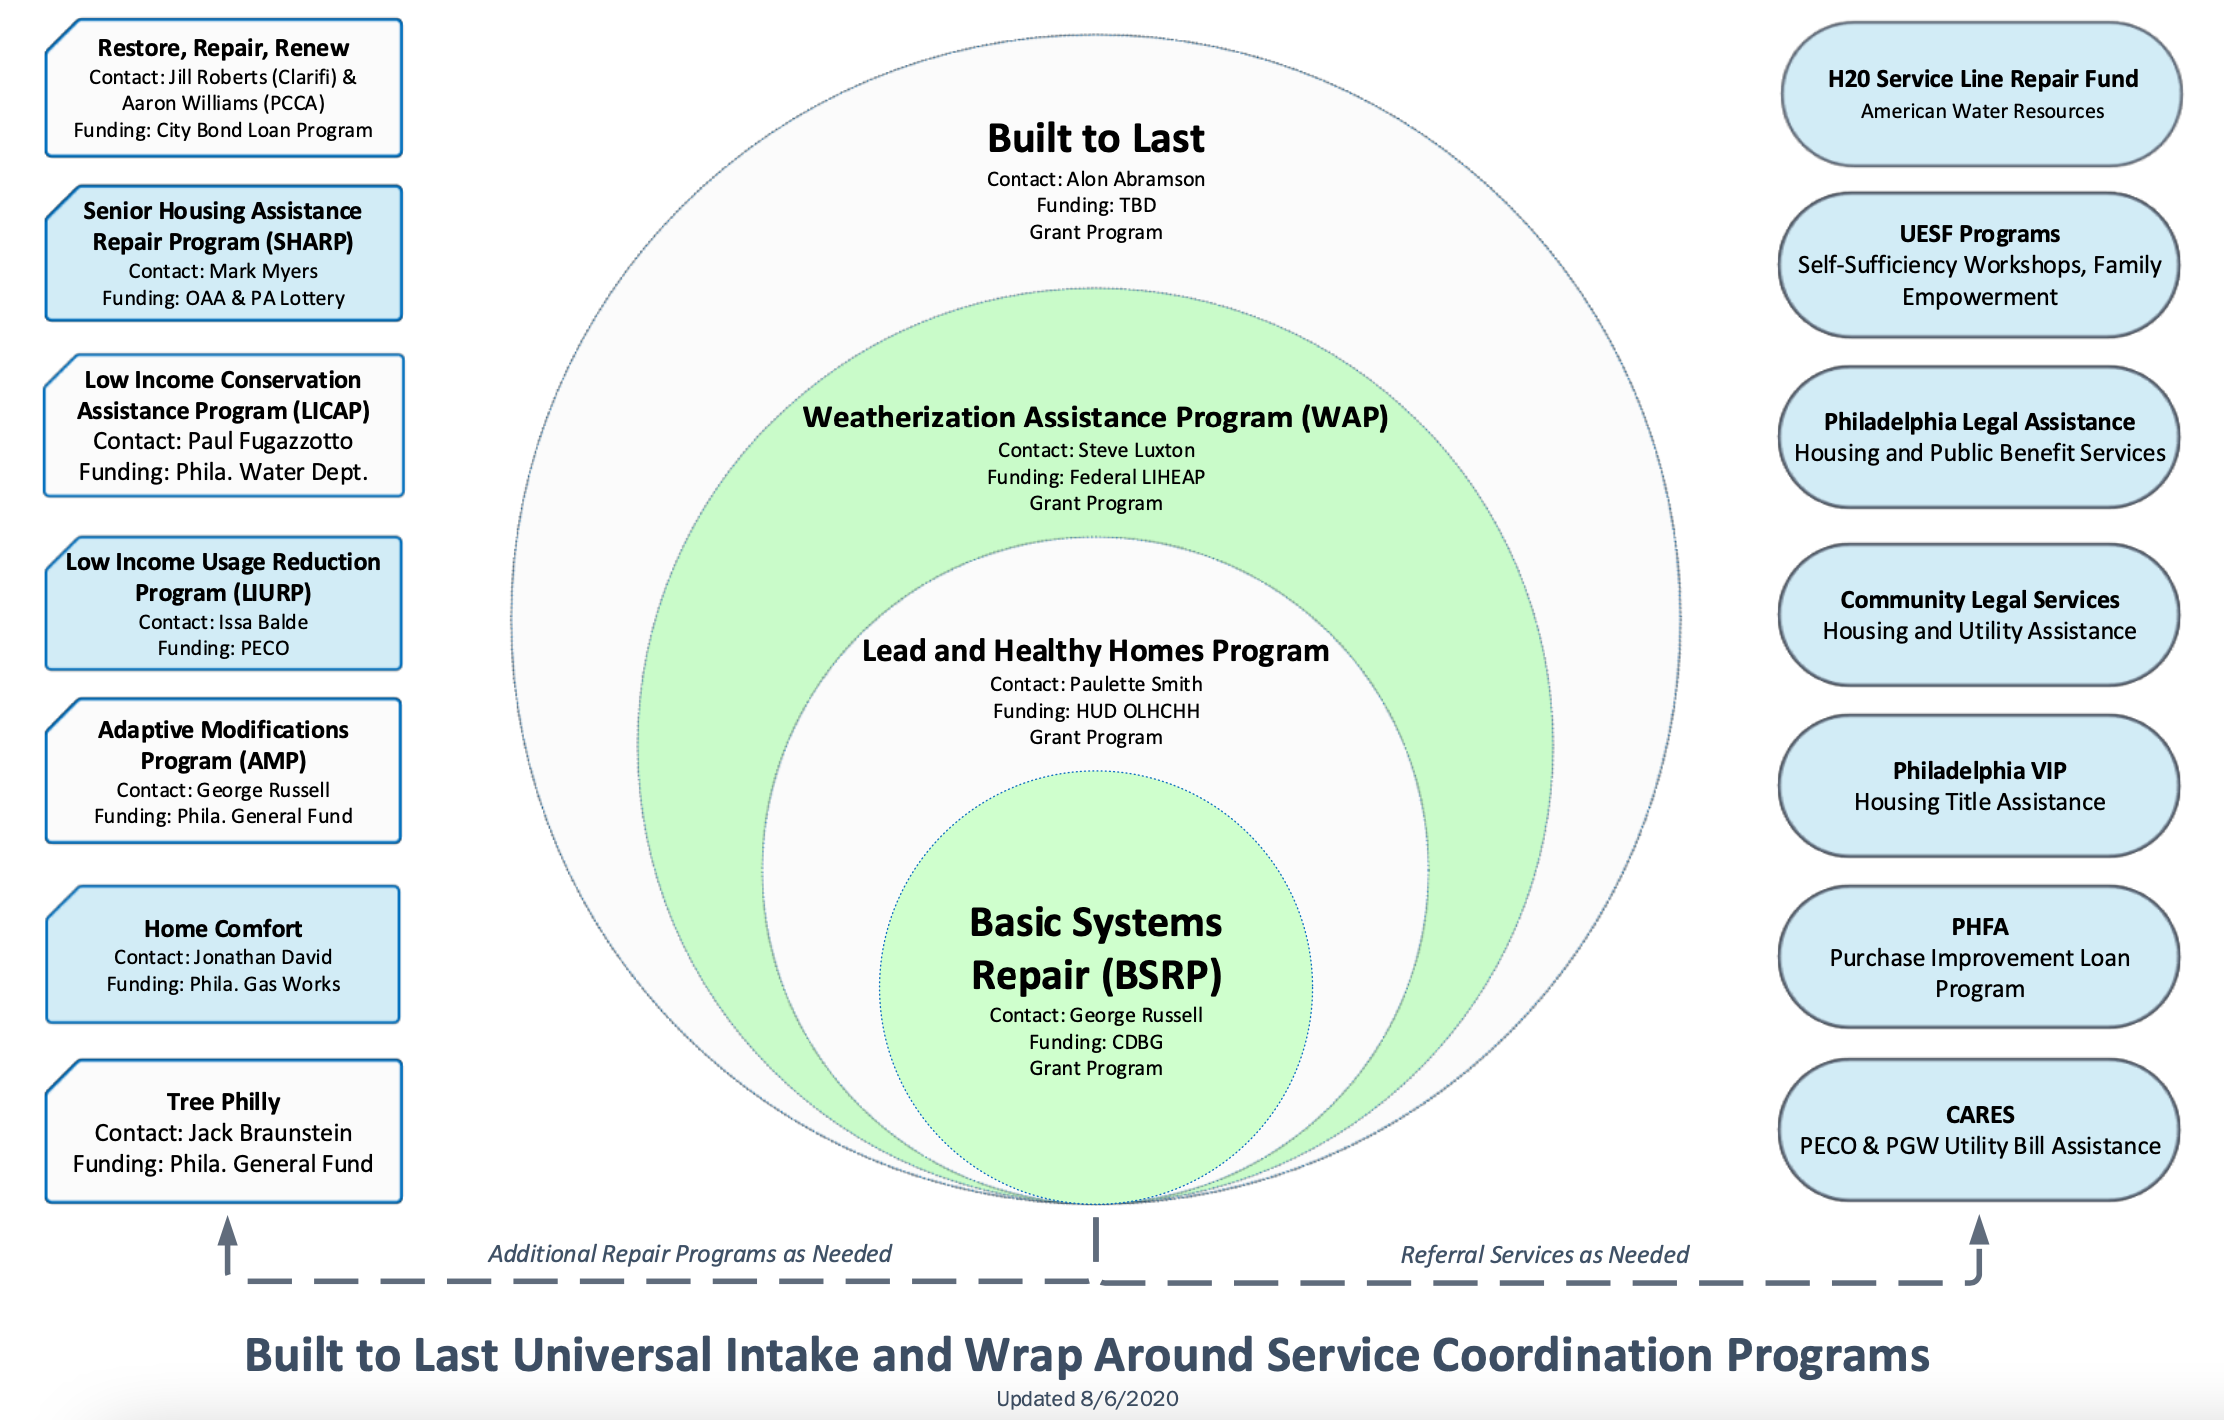 Graphic depicting the facets of the Built to Last program courtesy of PEA.